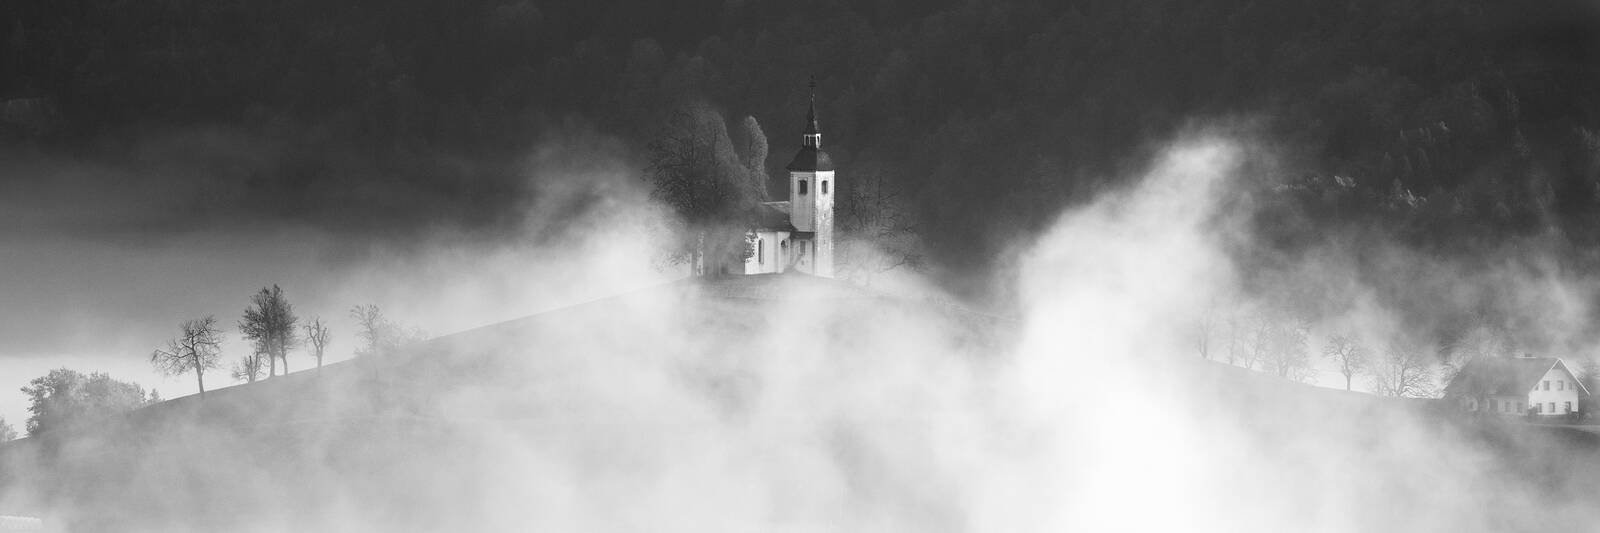 Image of Sveti Tomaž (St Thomas) Church by Louise Welcome